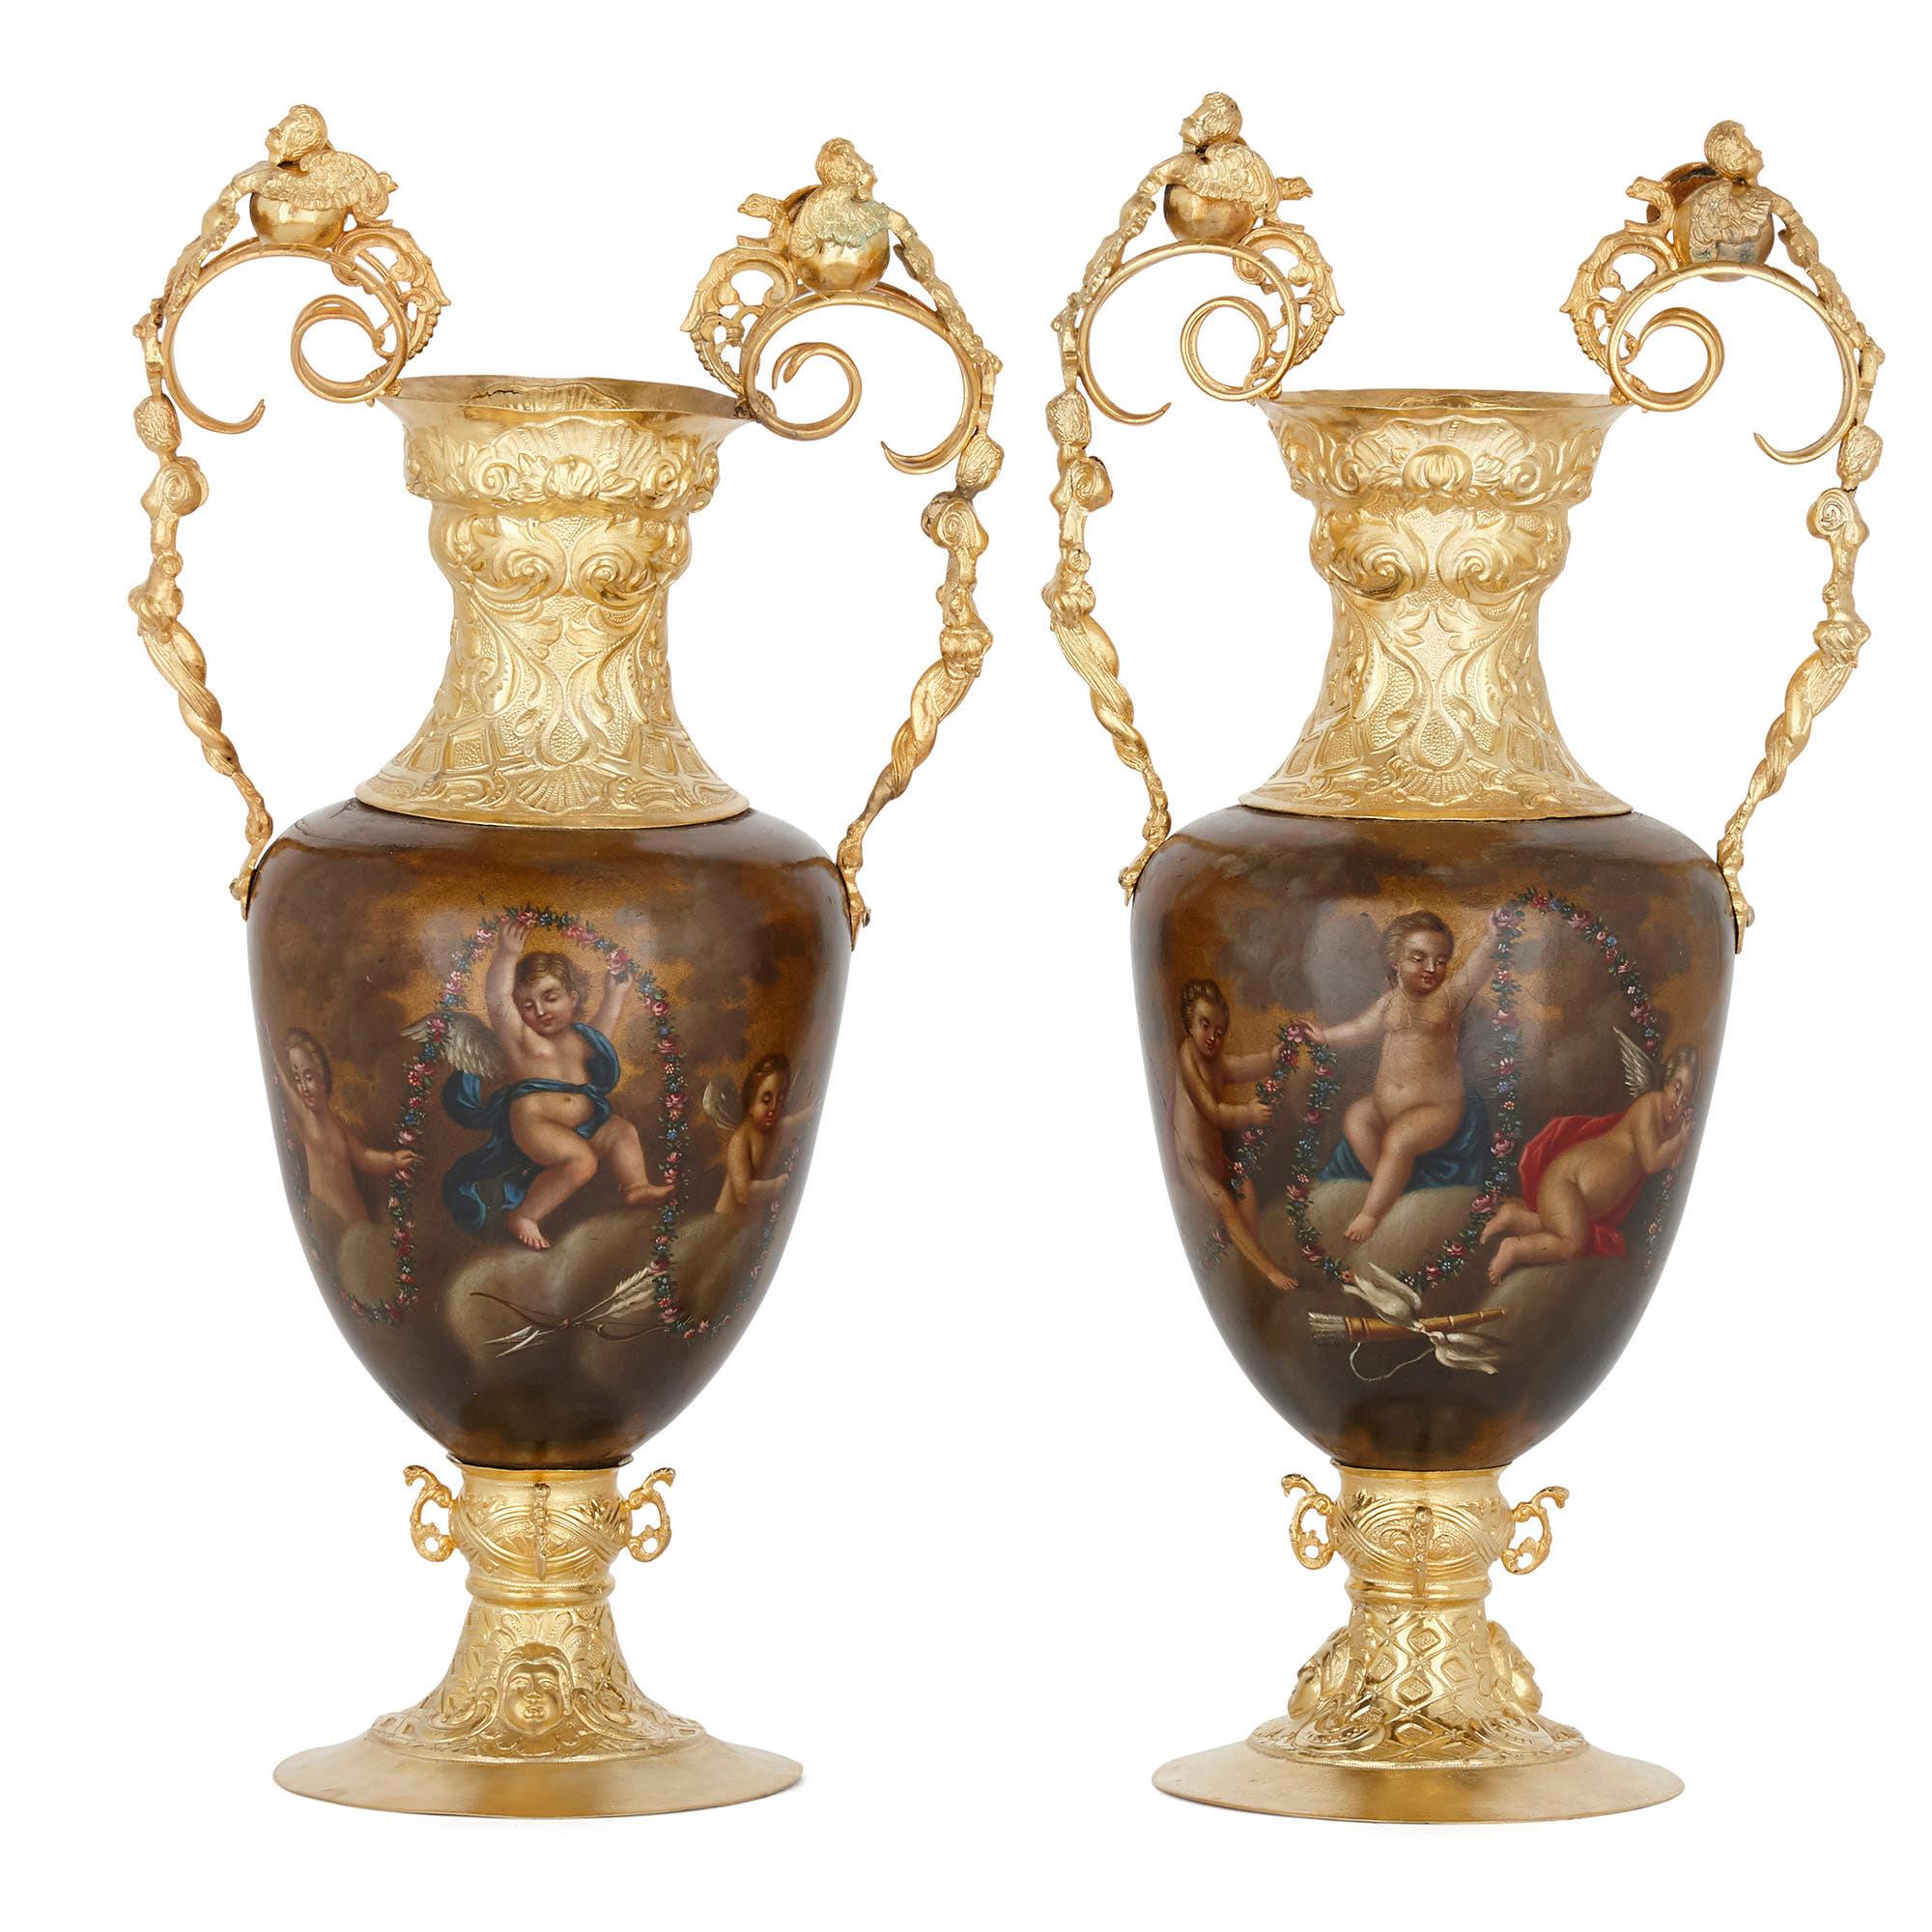 Pair of vermeil and vernis Martin Louis XV style vases
French, 19th century
Measures: Height 37cm, width 19cm, depth 13cm

This beautiful pair of vases features fine silver-gilt mounts and bodies decorated with vernis Martin, the varnishing